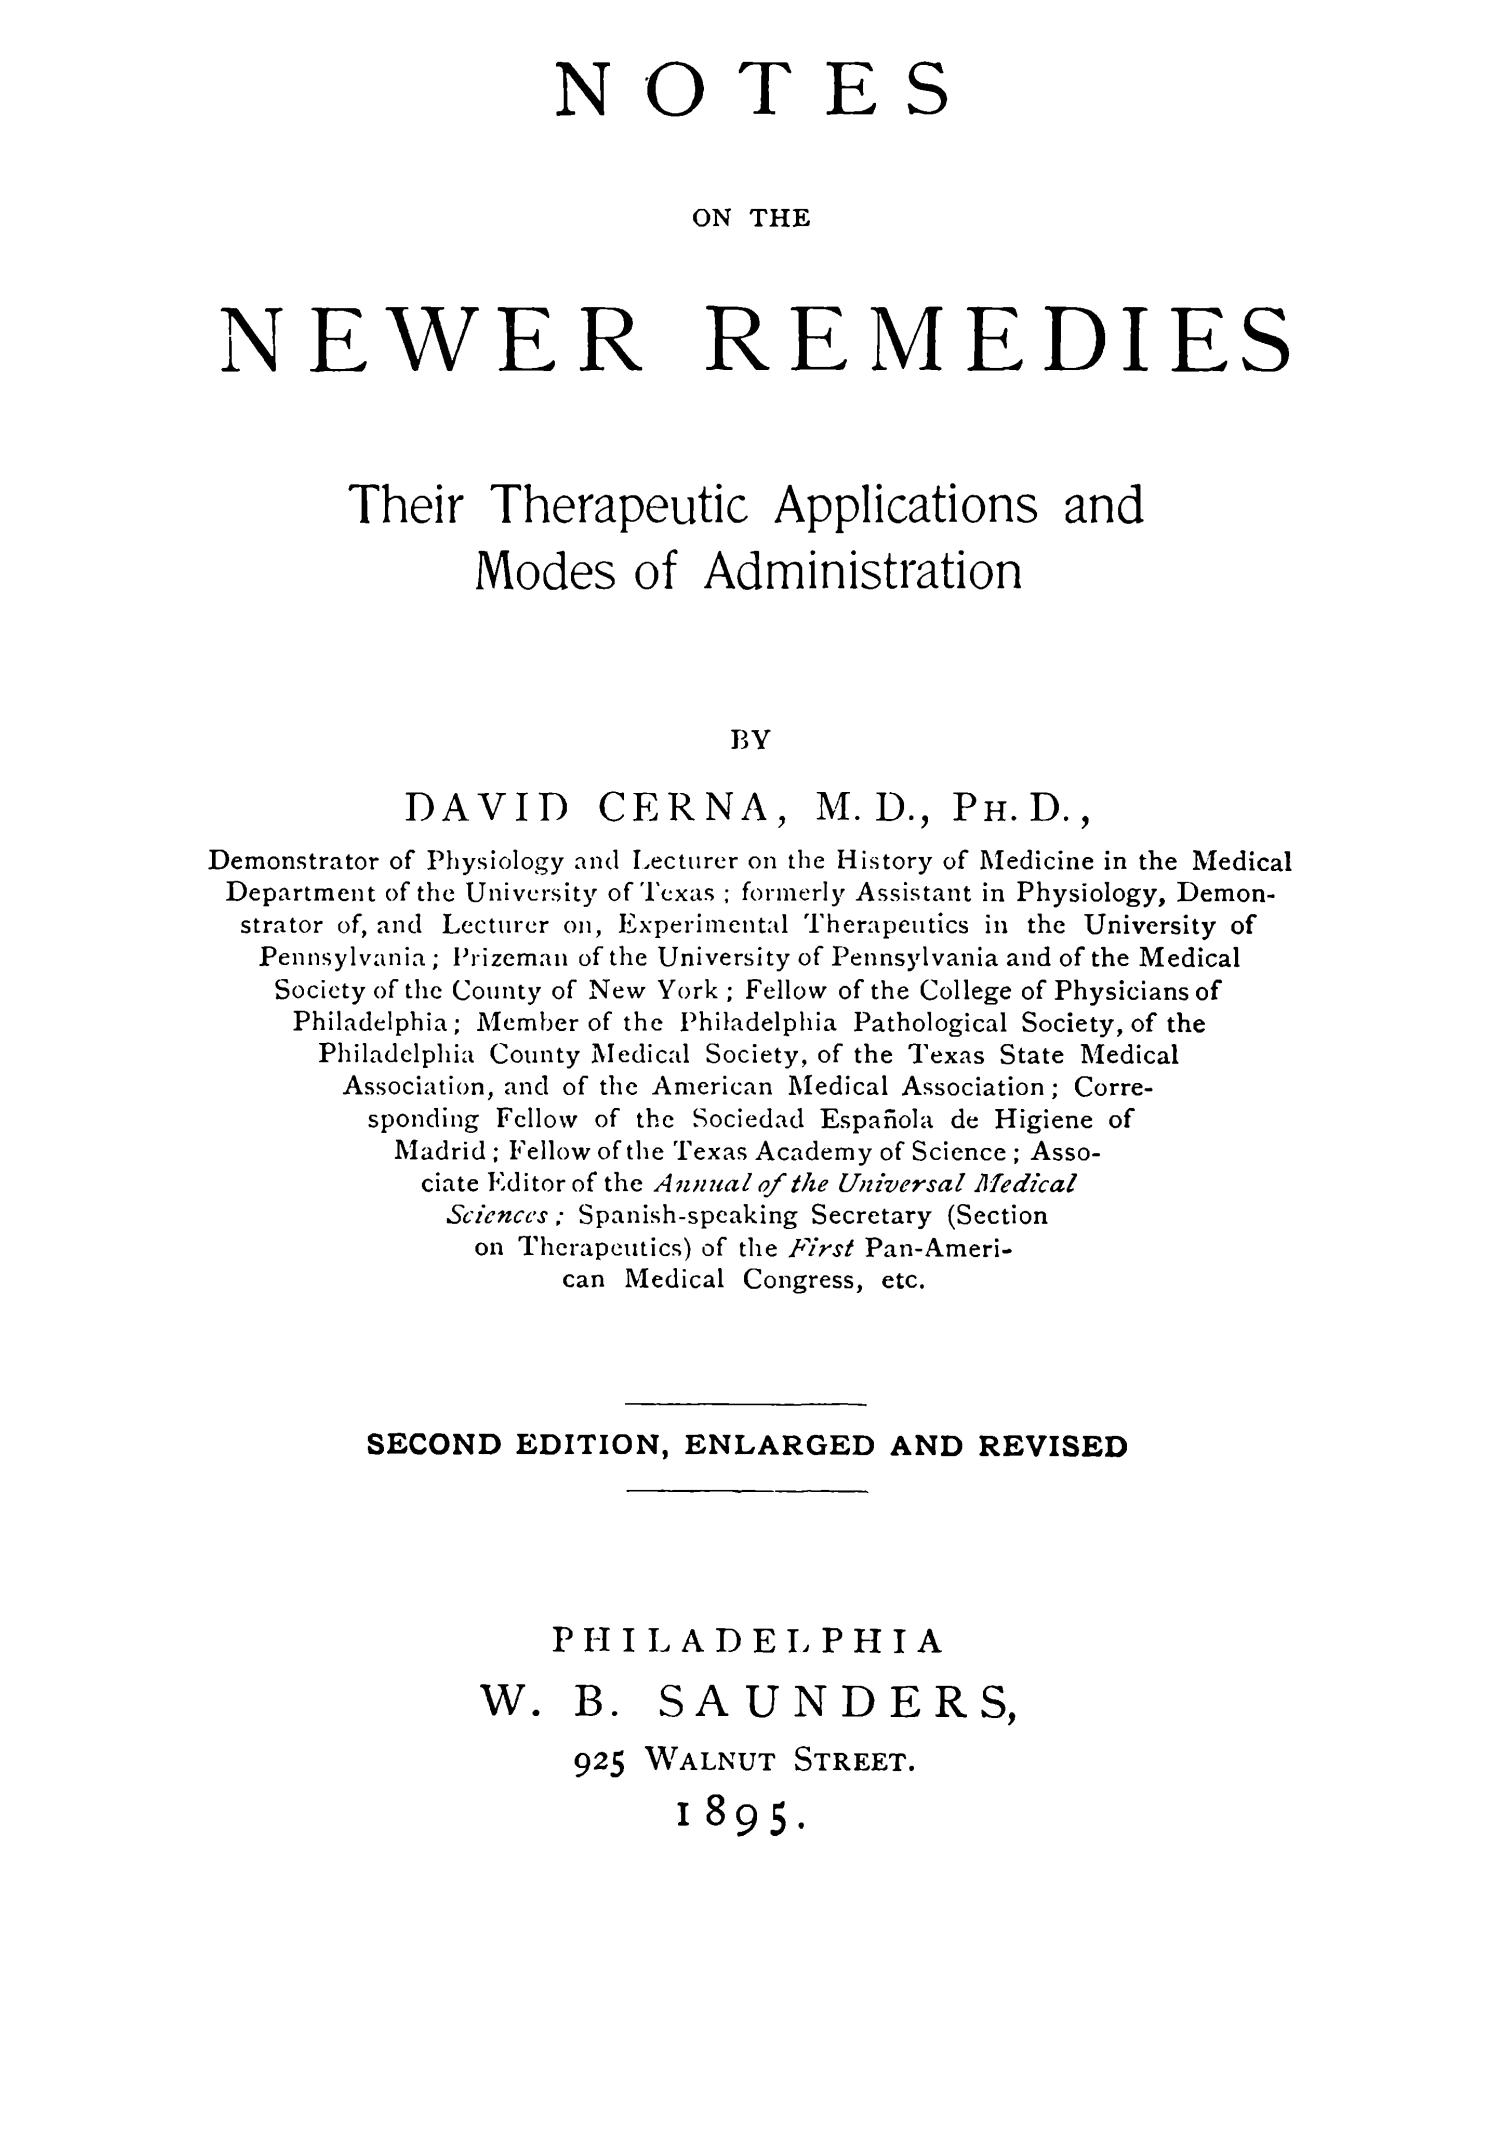 Notes on the Newer Remedies: Their Therapeutic Applications and Modes of Administration, Second Edition
                                                
                                                    Title Page
                                                